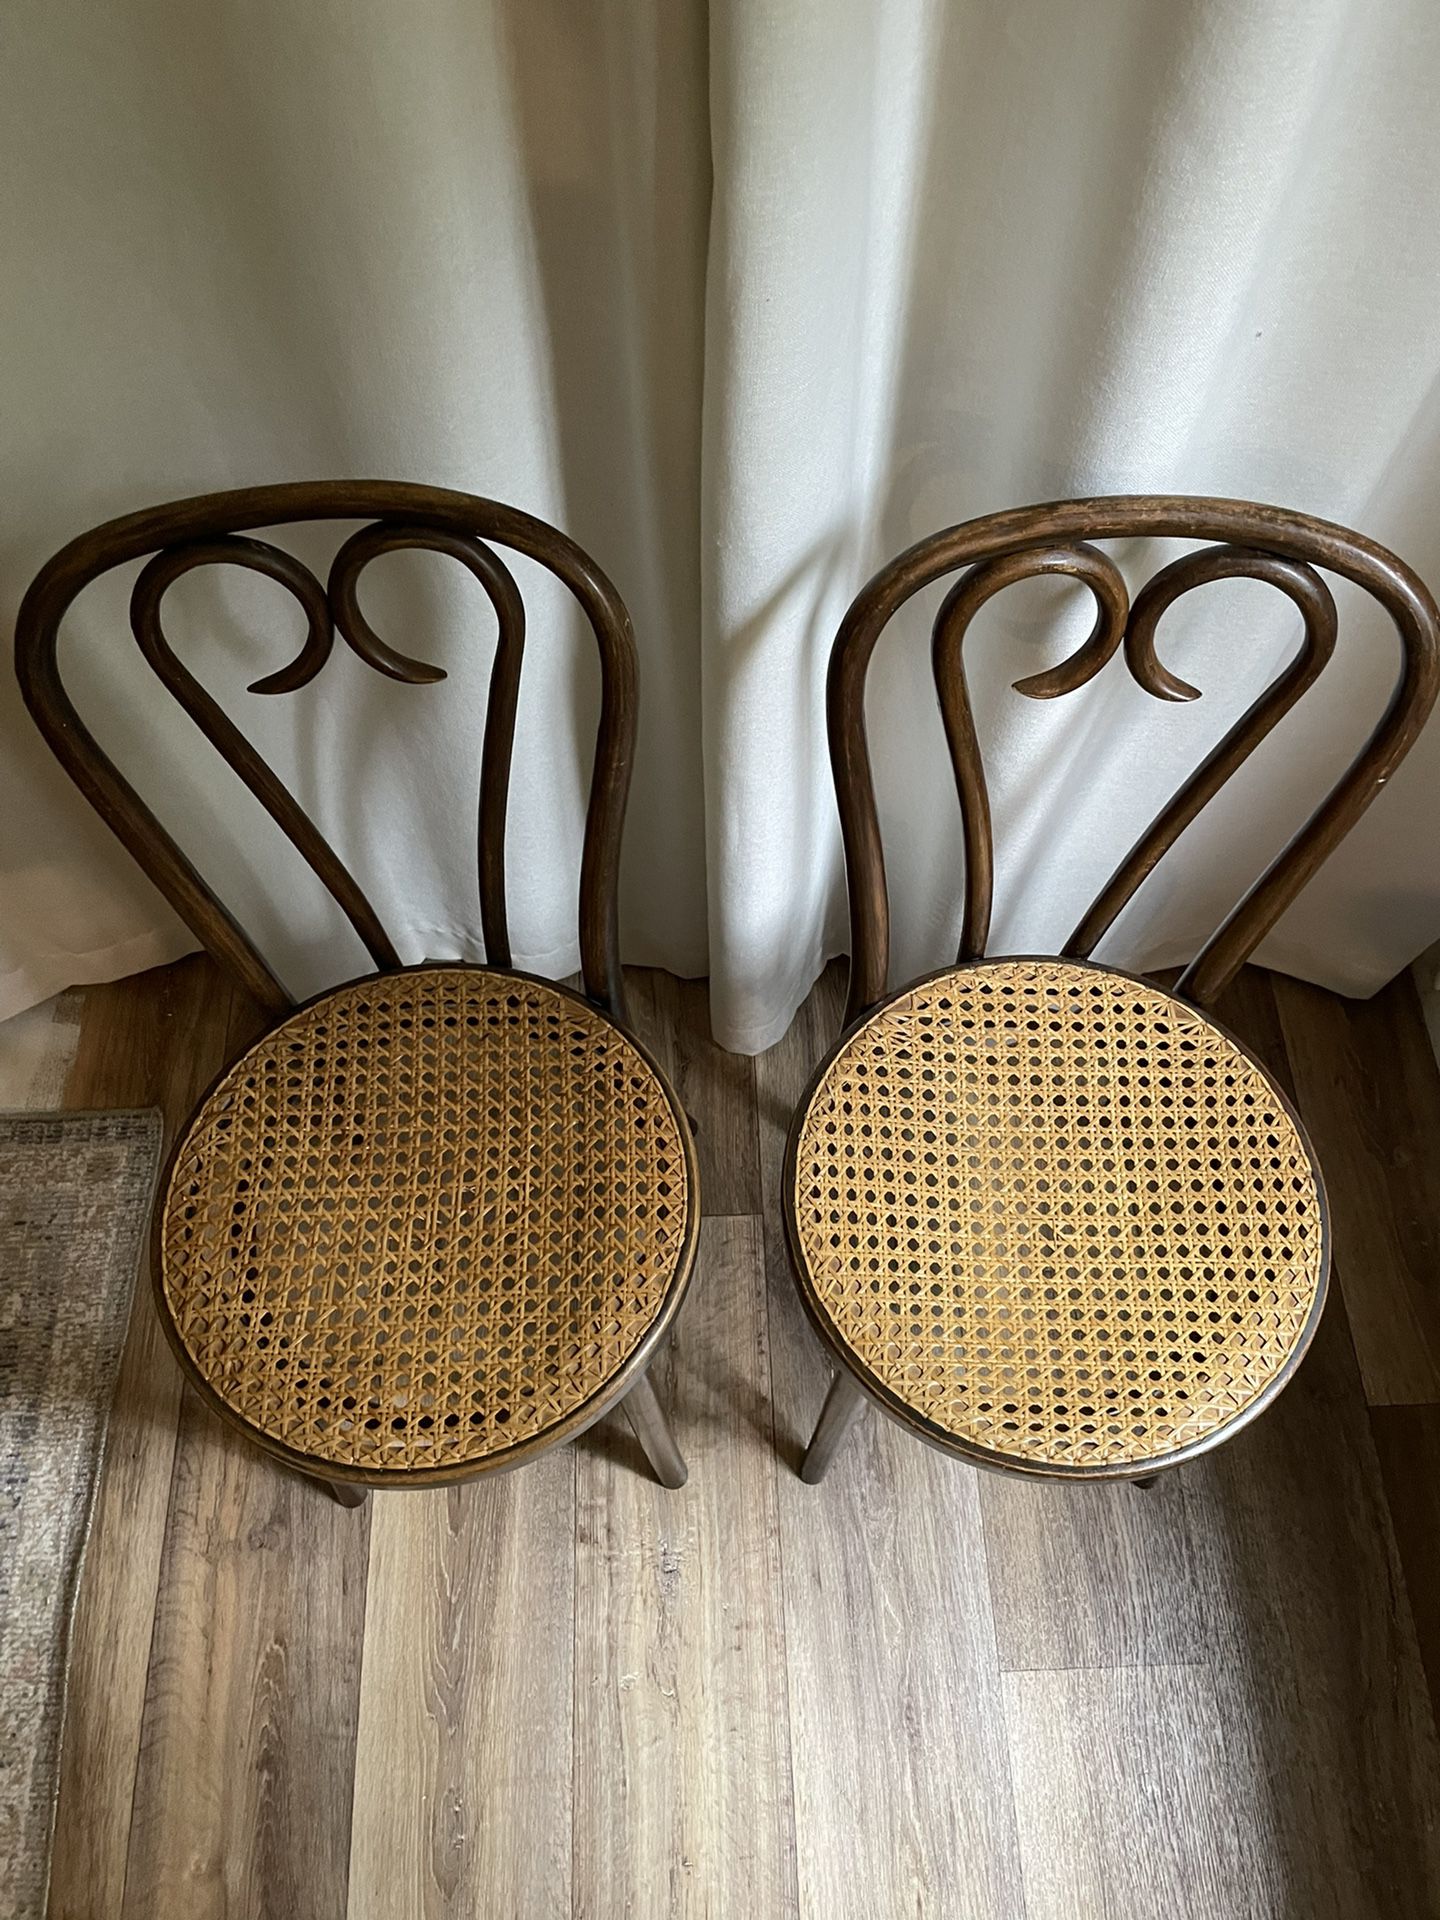 Pair of Vintage Bentwood Chairs with Cane Seats